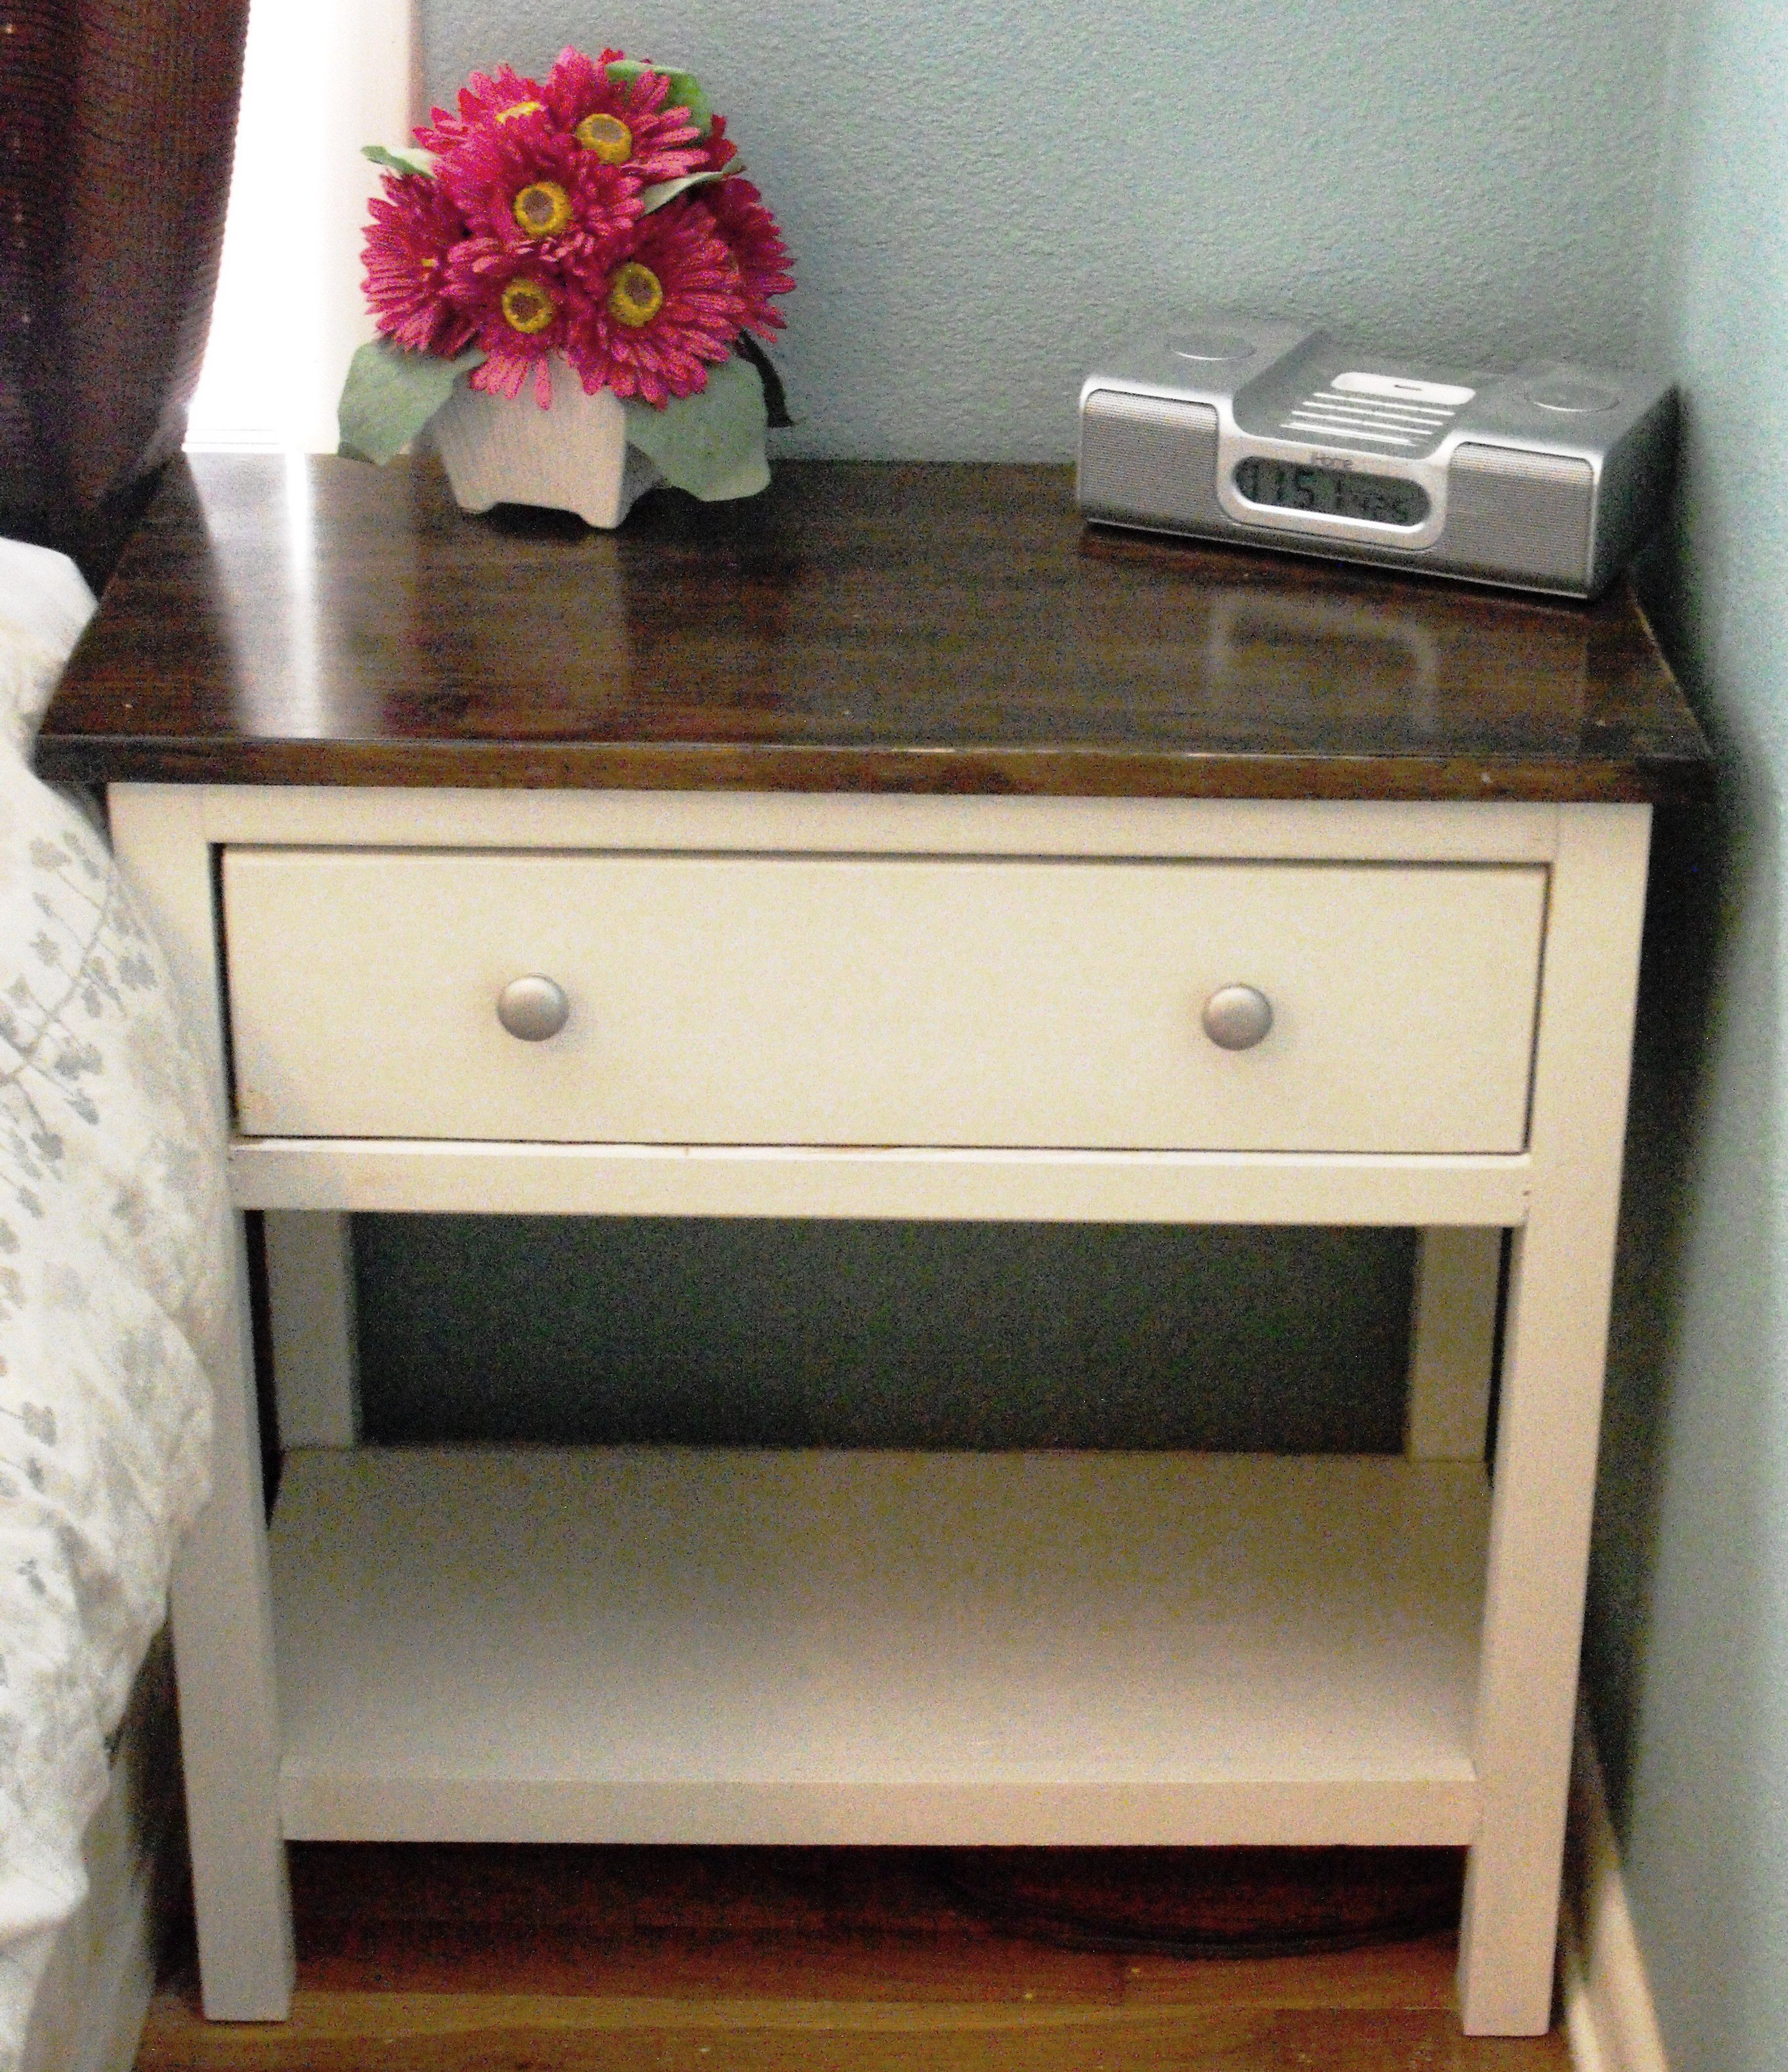 ana white farmhouse bedside table diy projects style accent side clearance pottery barn mini lamp led floor leather trunk outside bar furniture screw coffee legs ikea wall half